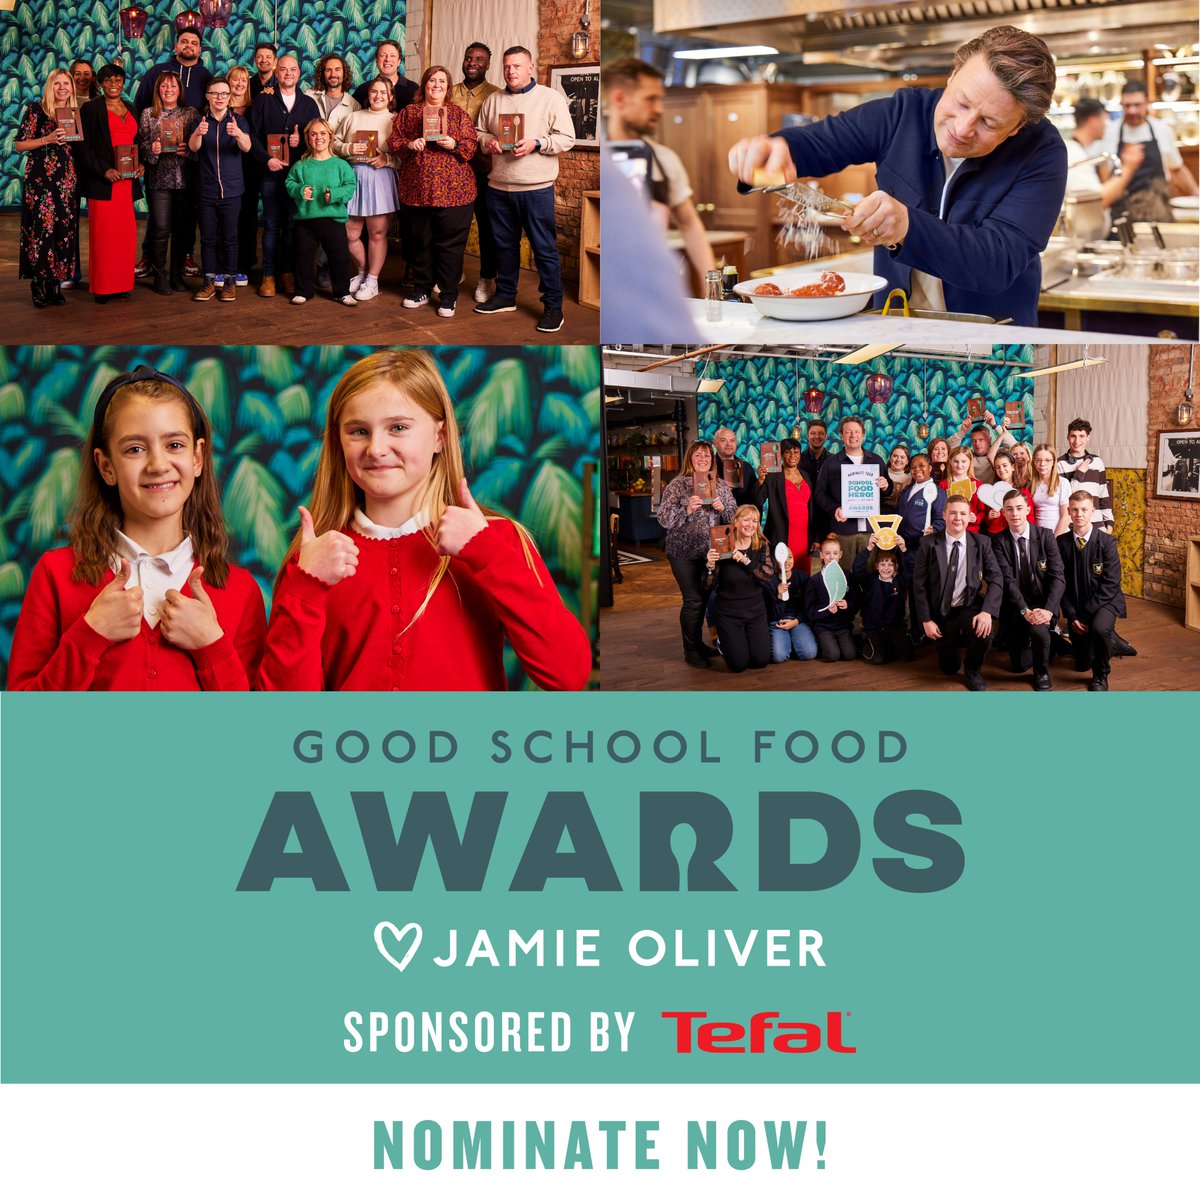 Do you know a school or individual doing amazing things with school dinners? Or
perhaps working miracles in food education, fueling bodies and minds?

Nominate them NOW for a @jamieoliver Good School Food Award

jamieoliver.com/schoolfoodawar… #GoodSchoolFoodAwards